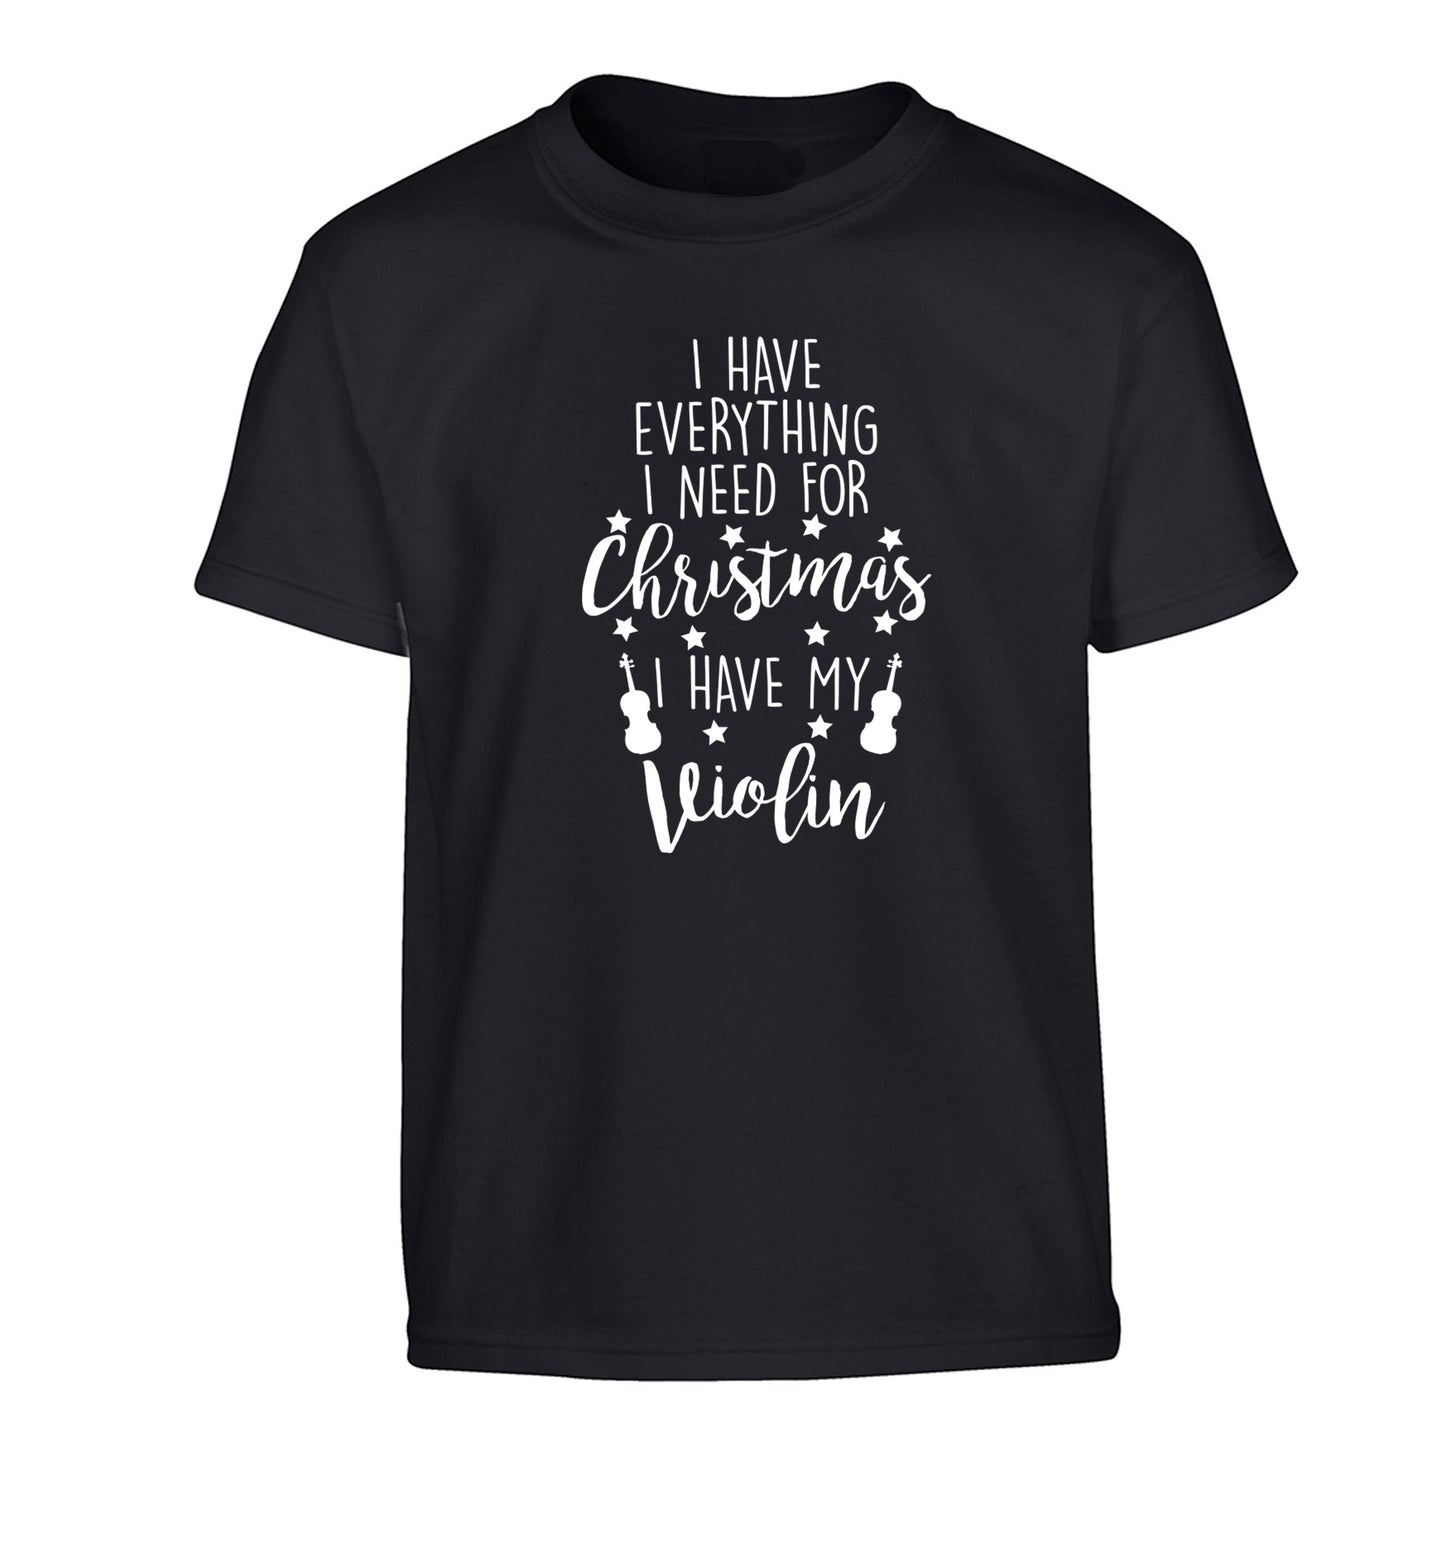 I have everything I need for Christmas I have my violin Children's black Tshirt 12-13 Years